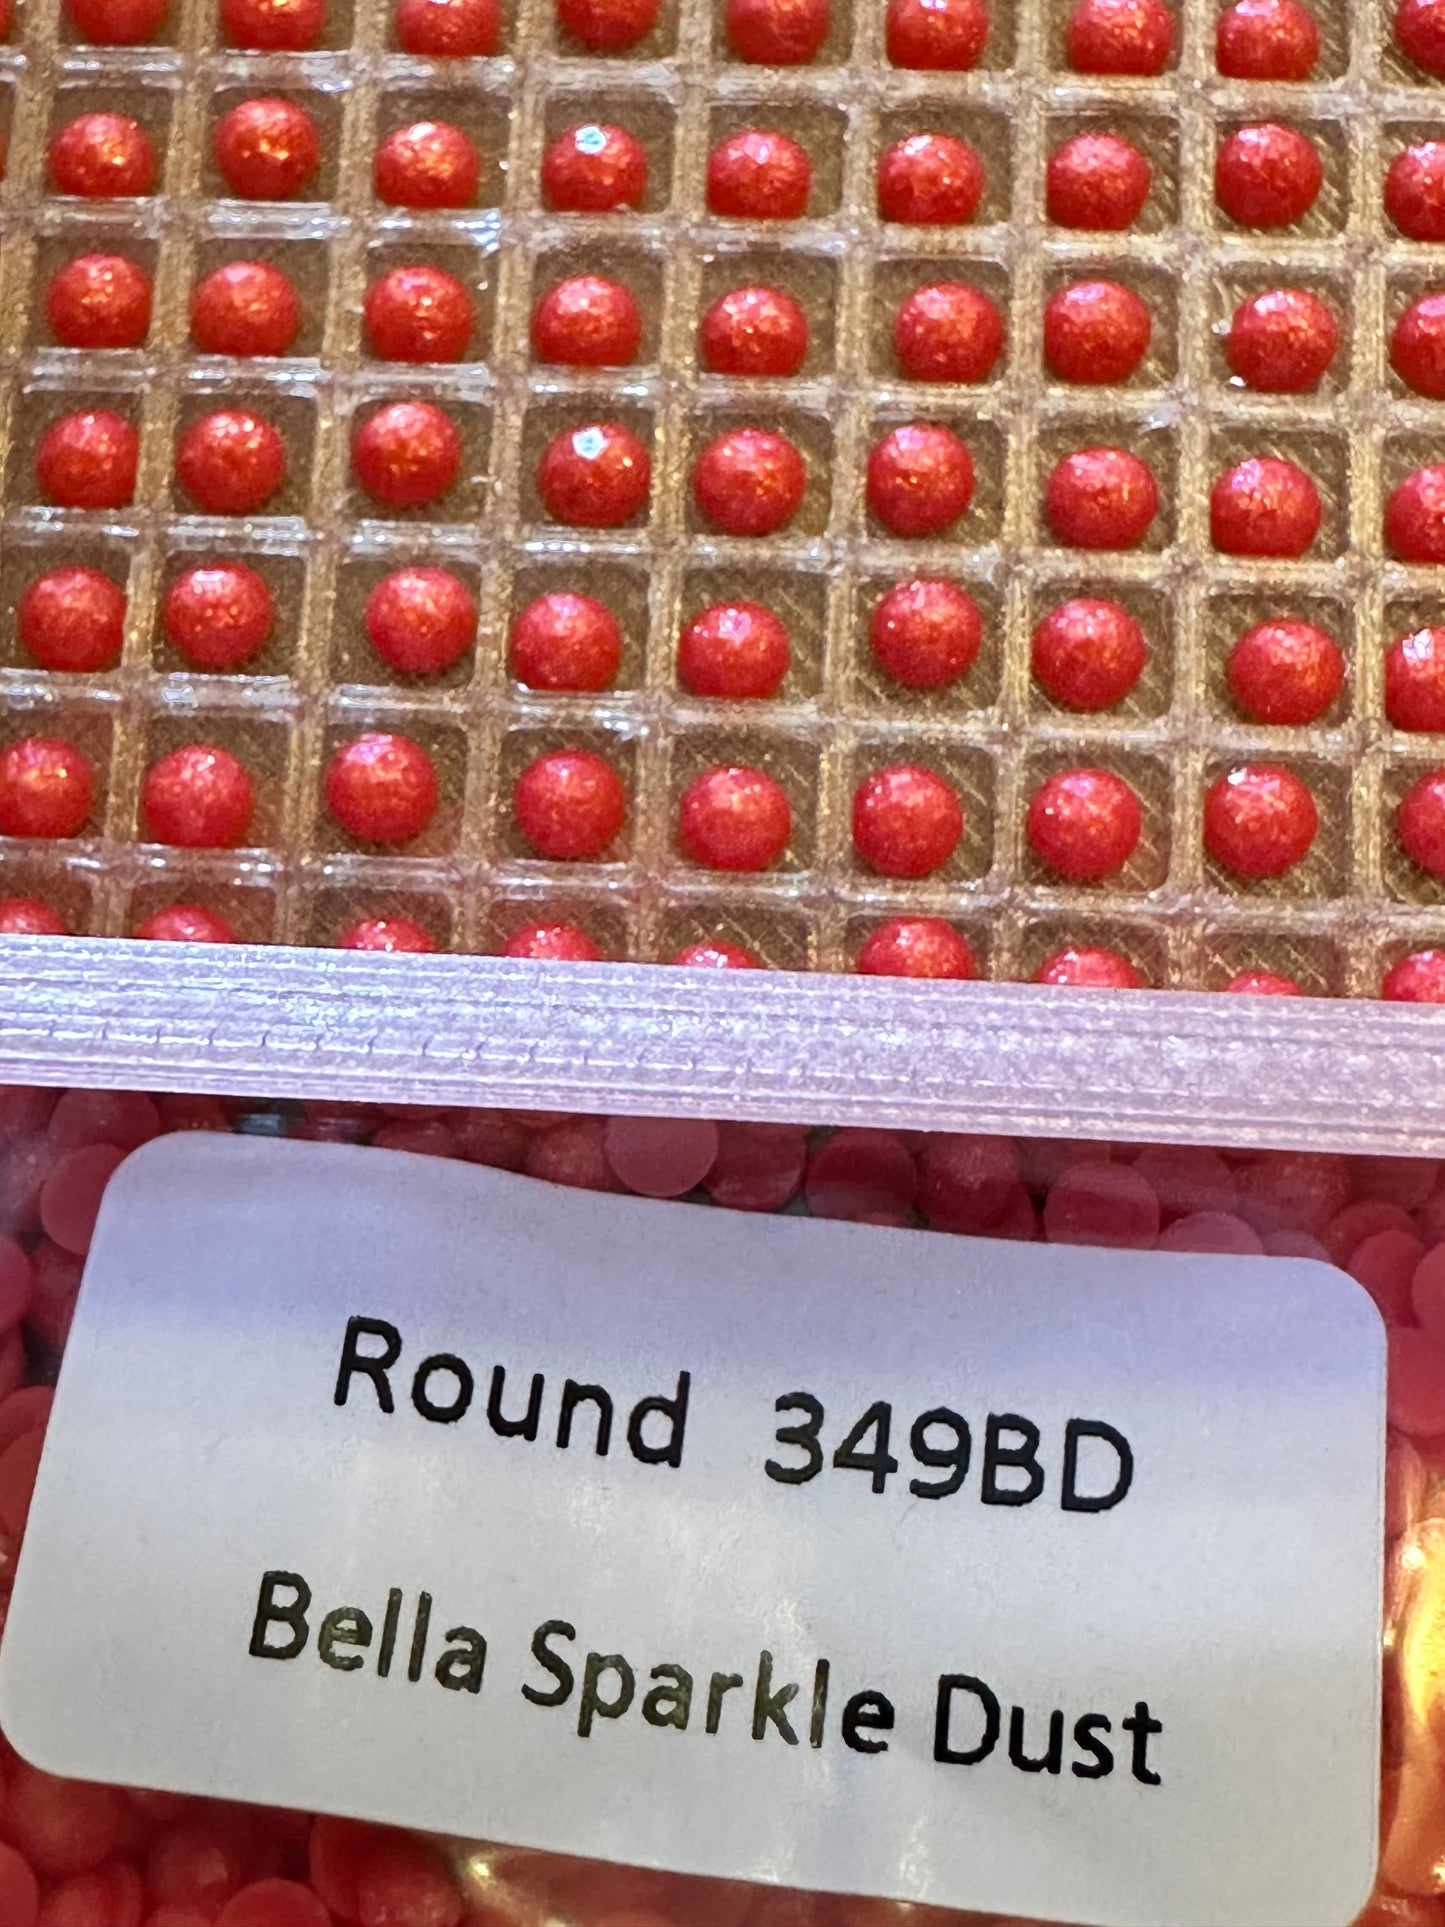 NEW Round Bella Sparkle Dust Diamond Painting Drills in 10 gram bags